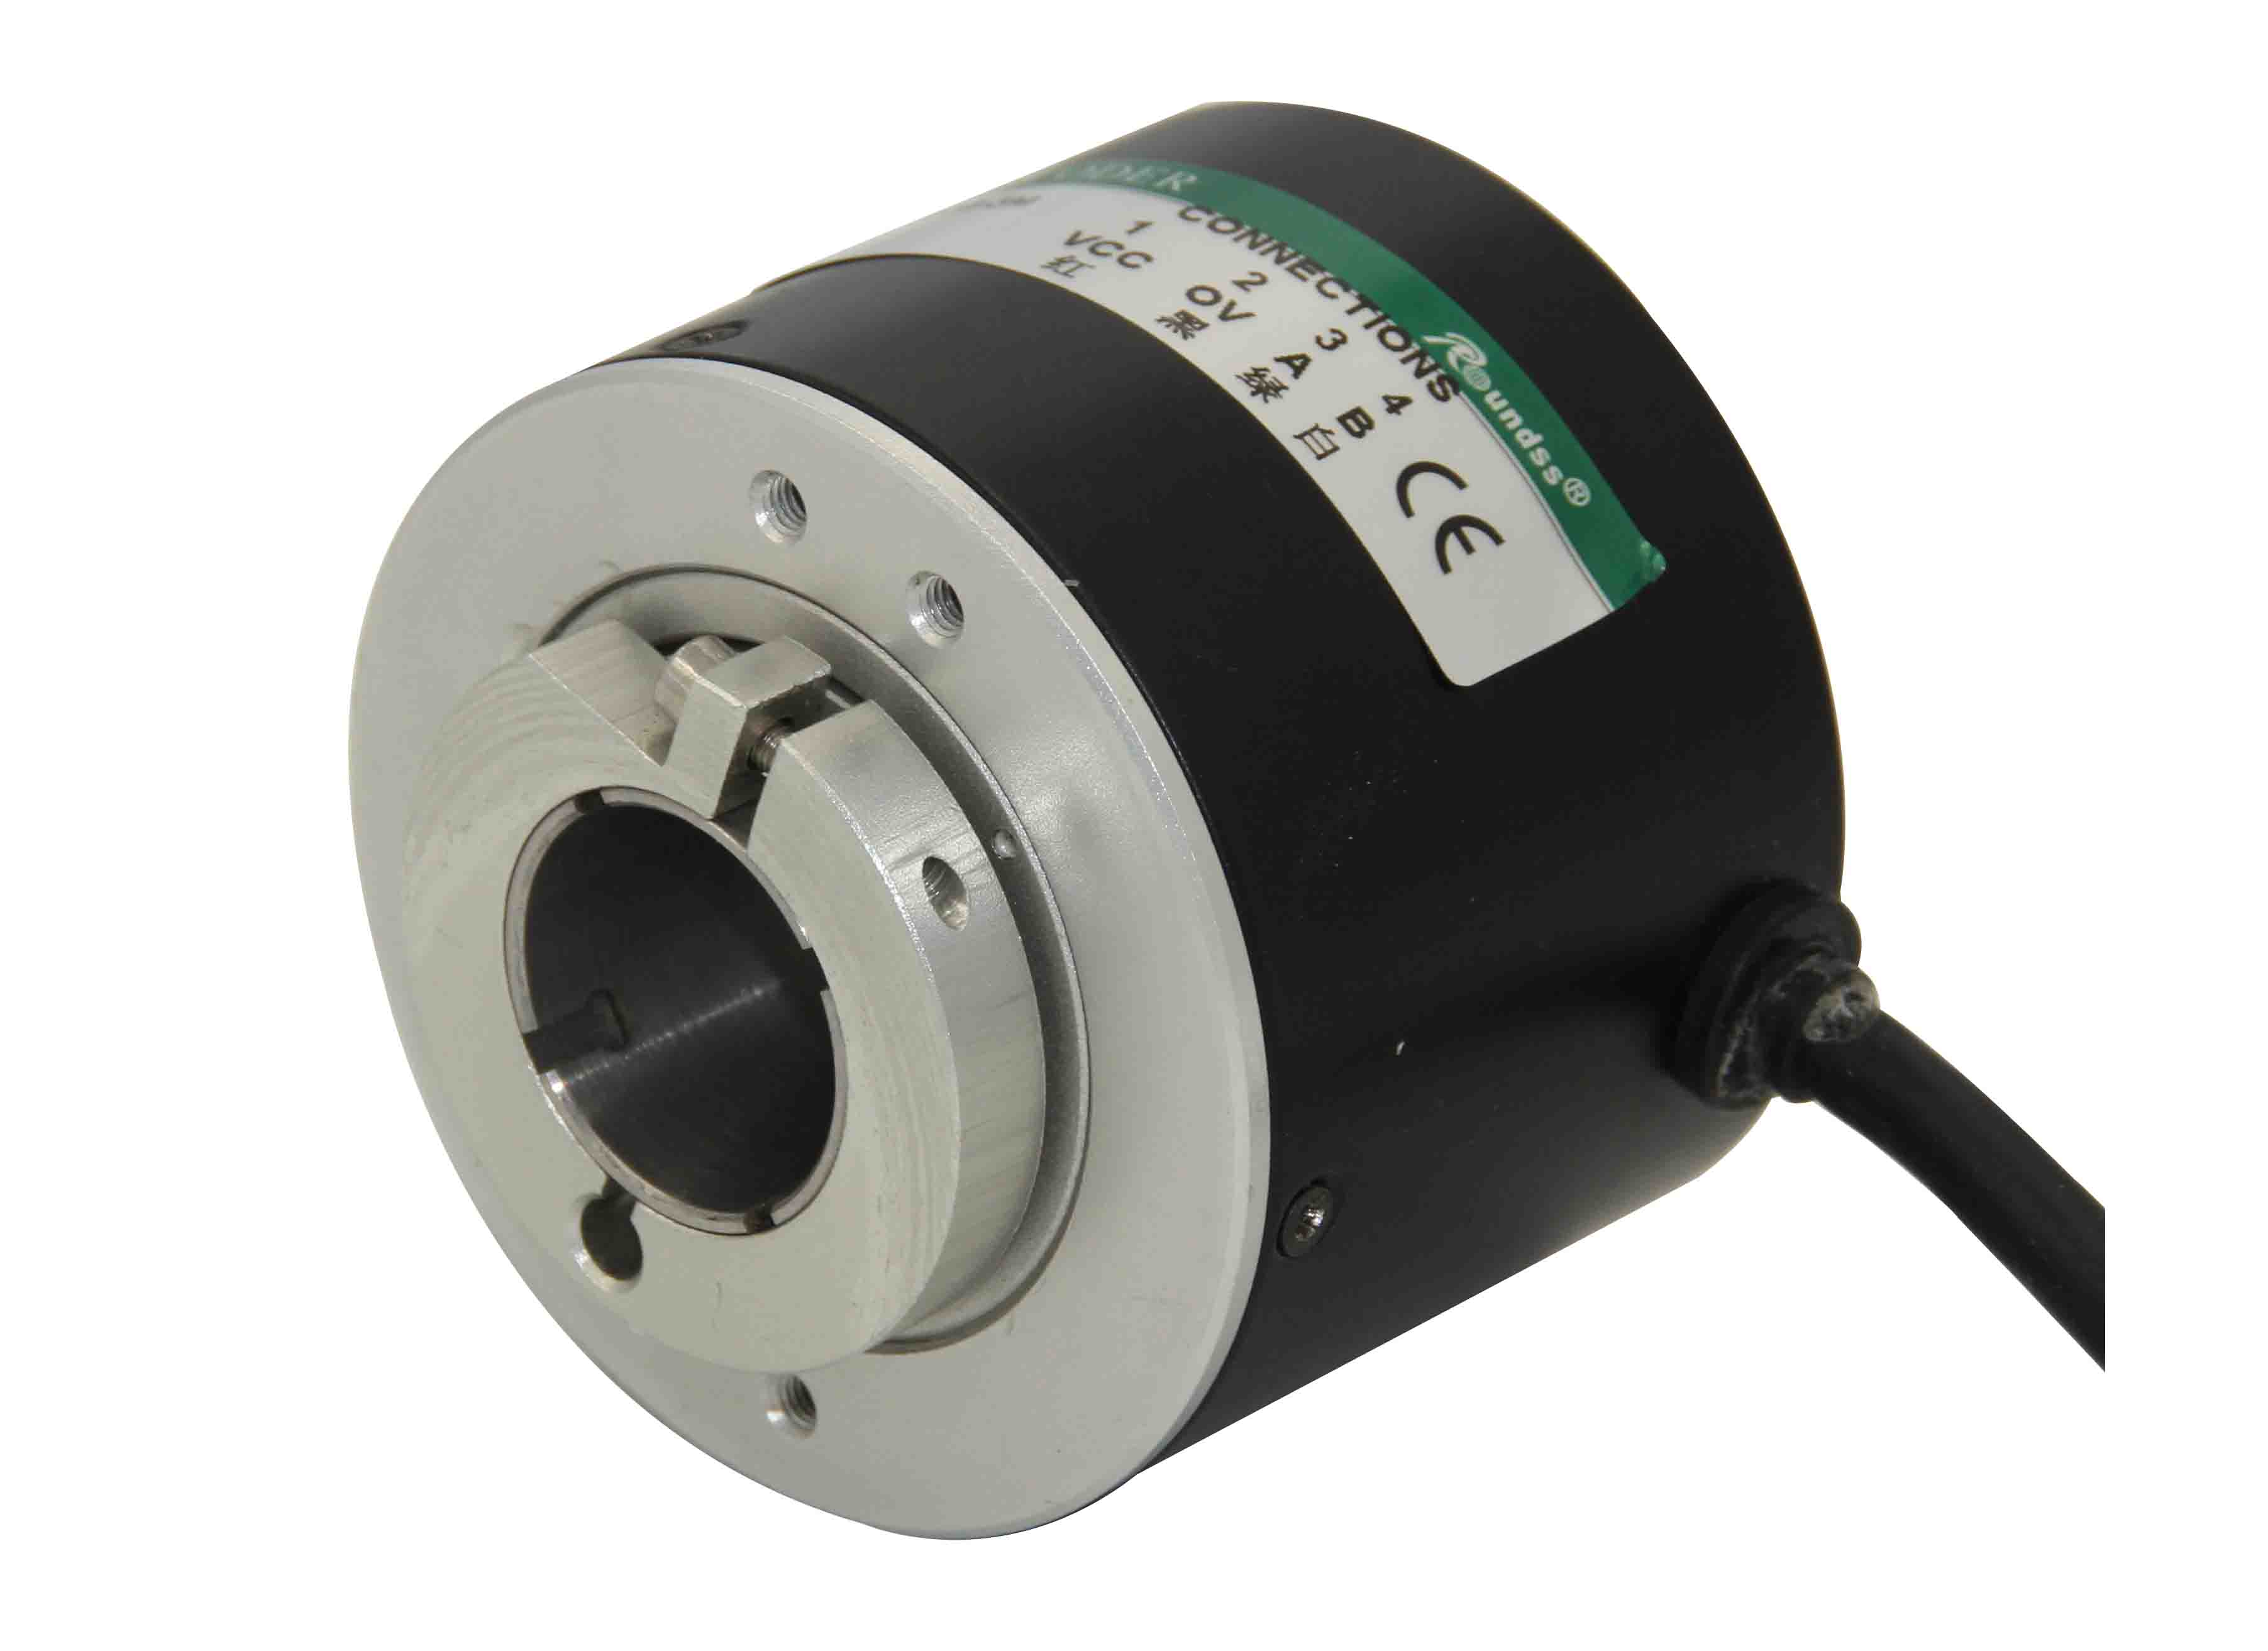 Absolute Encoder_Nonmagnetic Absolute Encoder